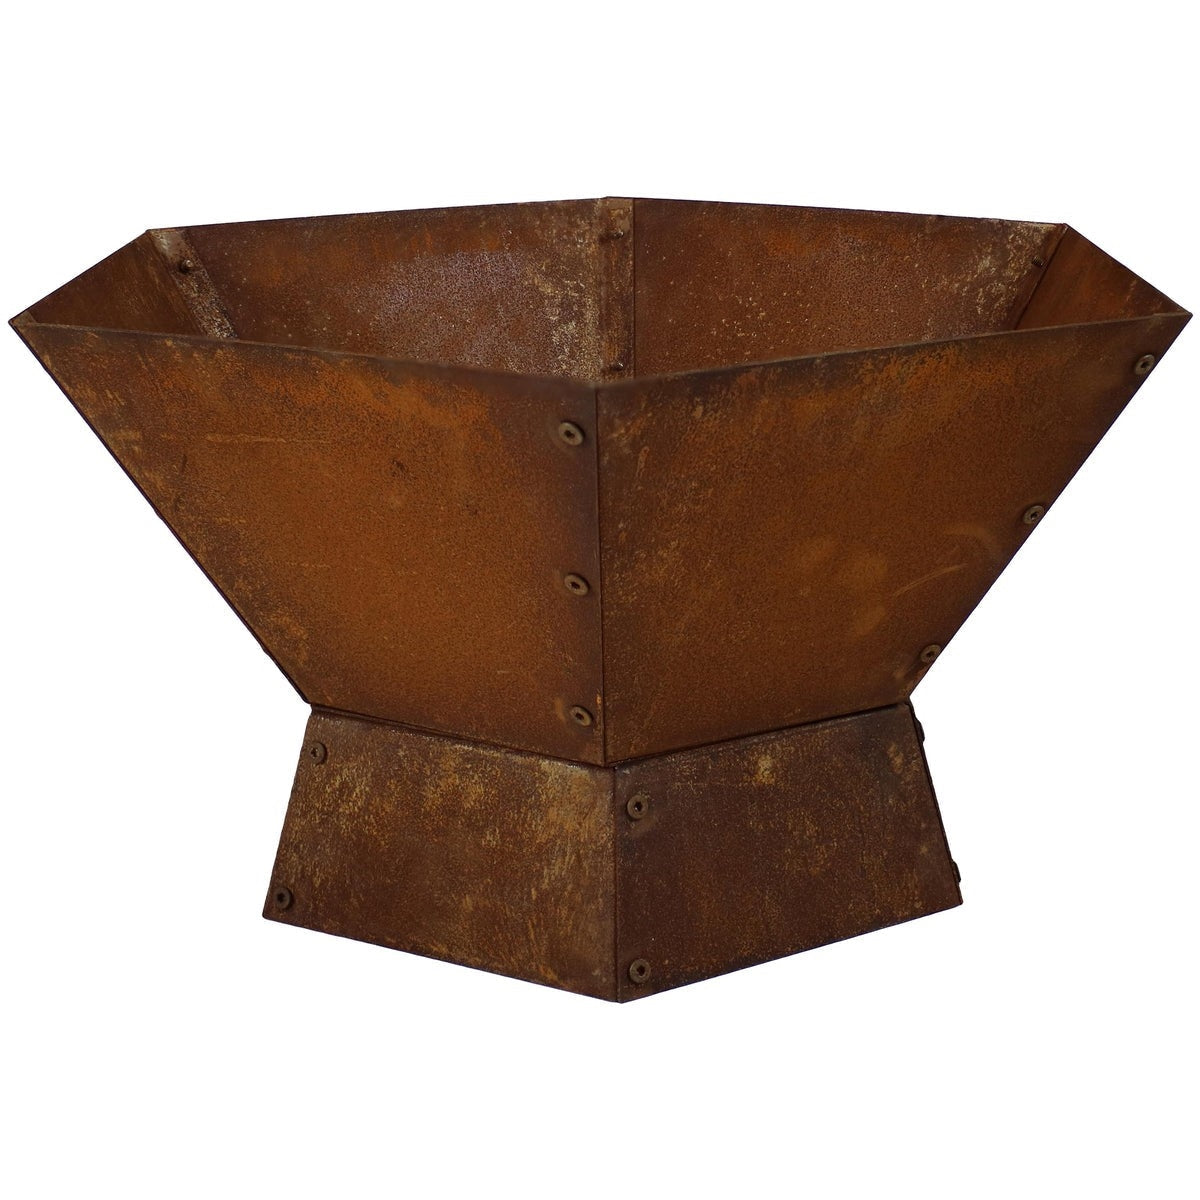 Outdoor > Outdoor Decor > Fire Pits - 23 Inch  Rustic Steel Affinity Fire Pit